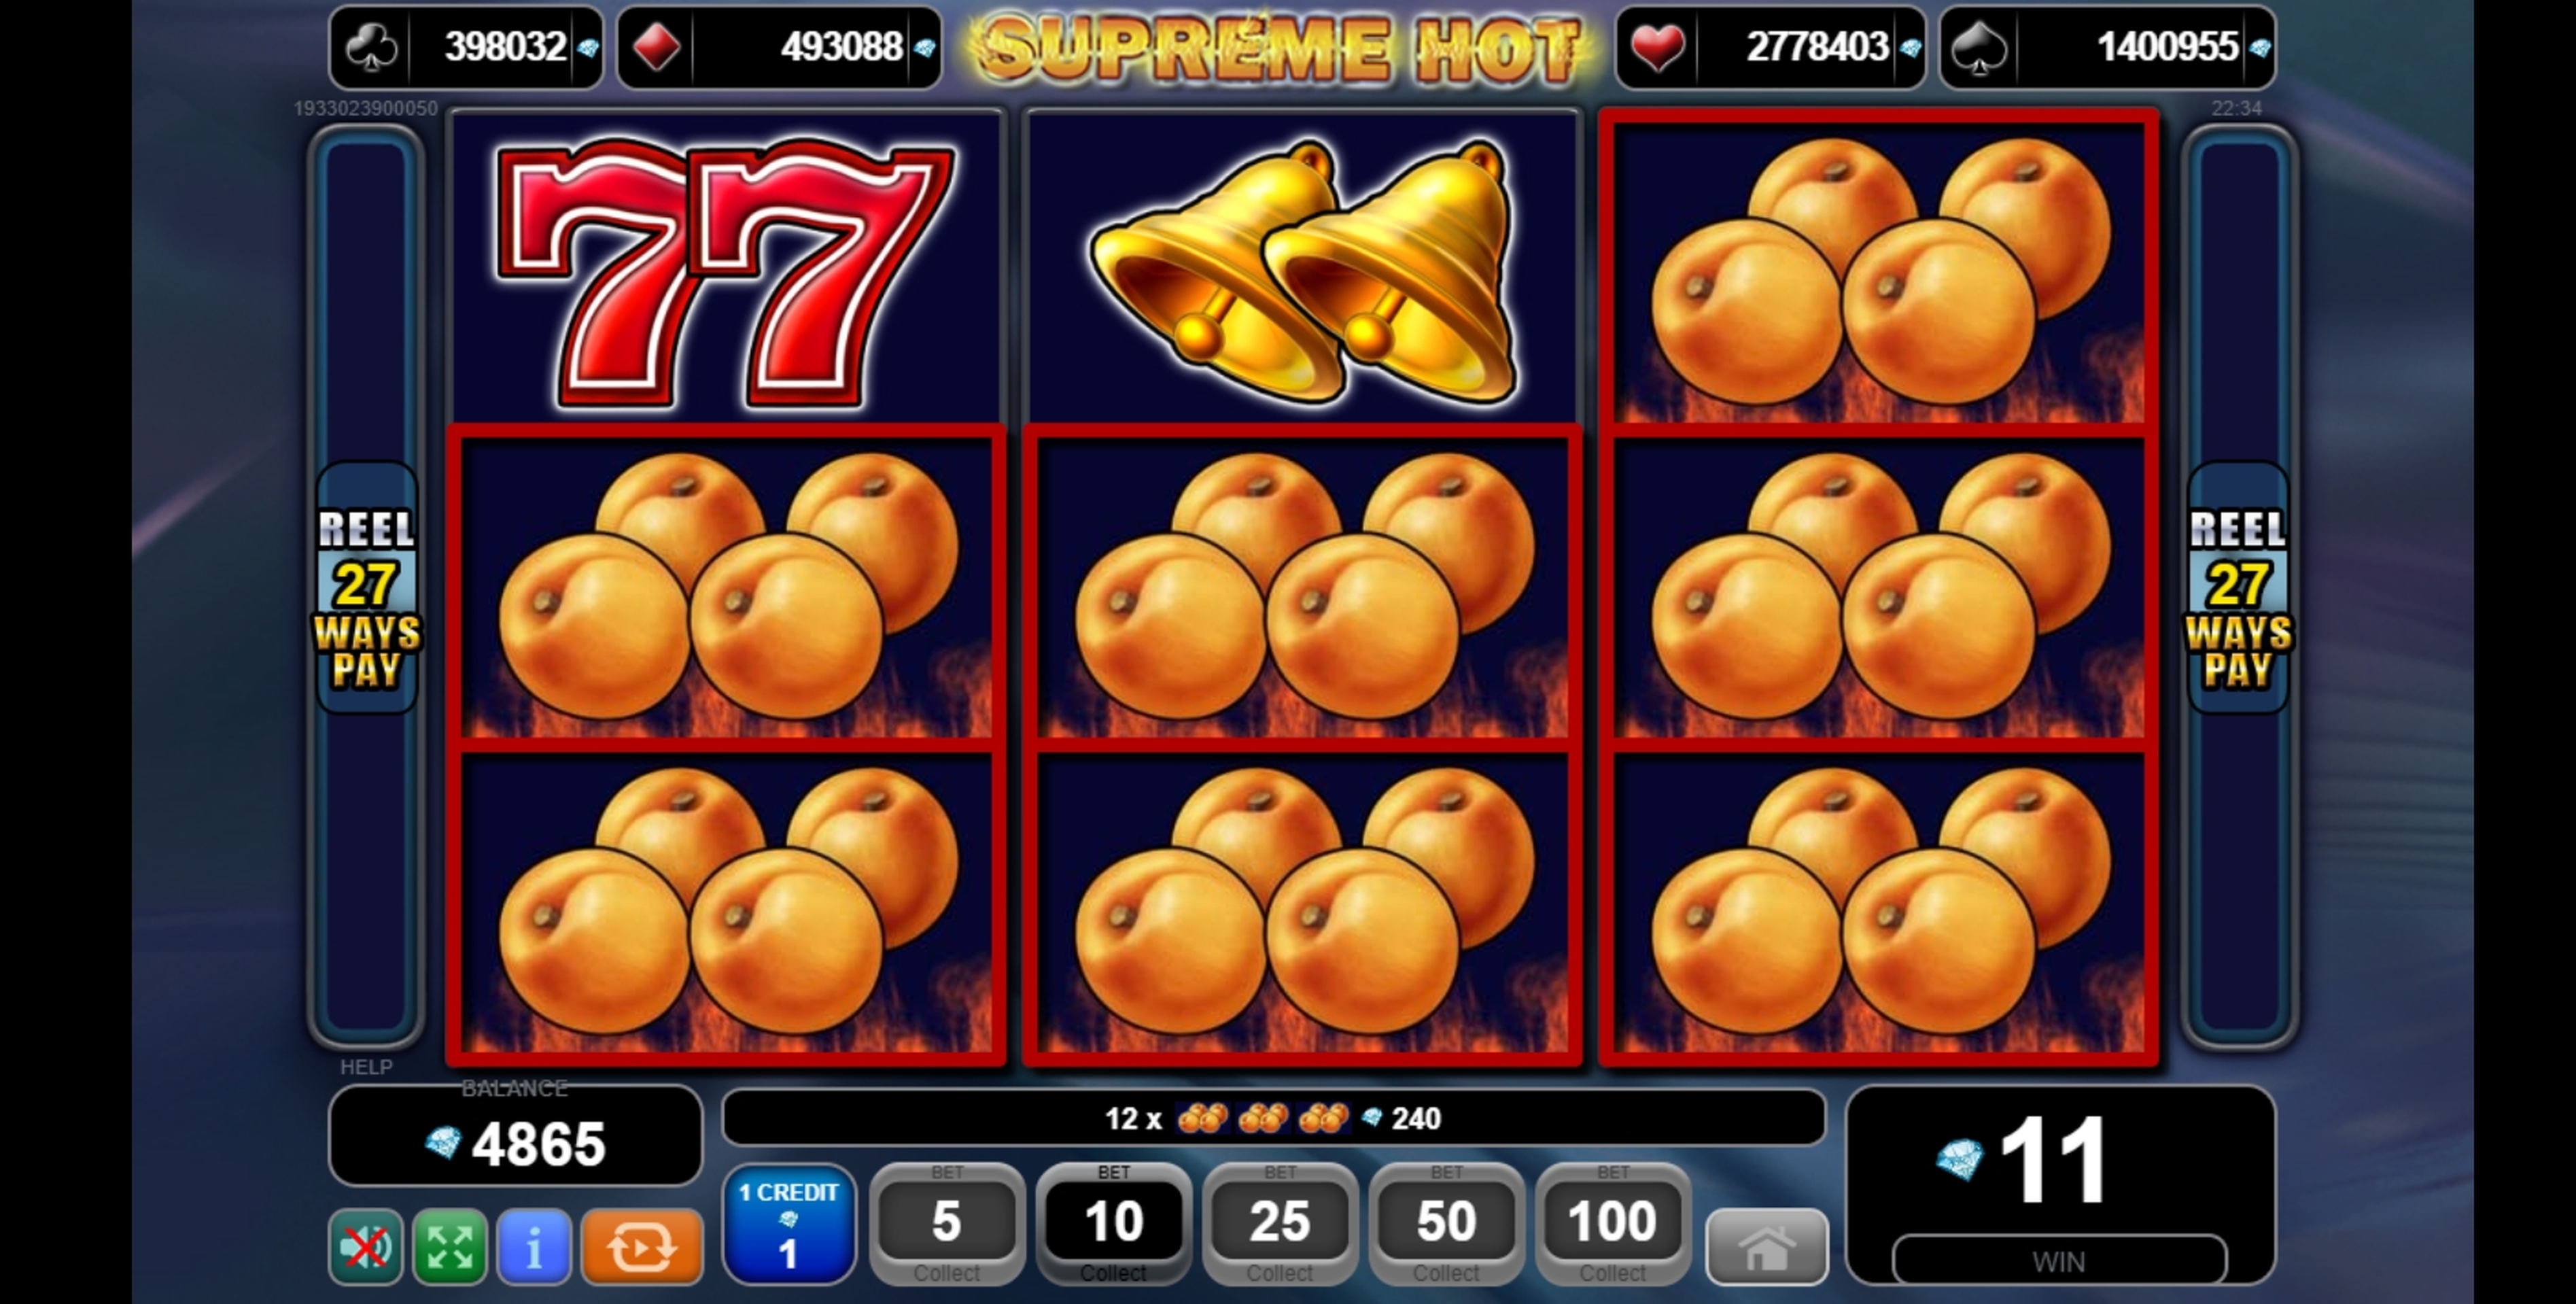 Win Money in Supreme Hot Free Slot Game by EGT